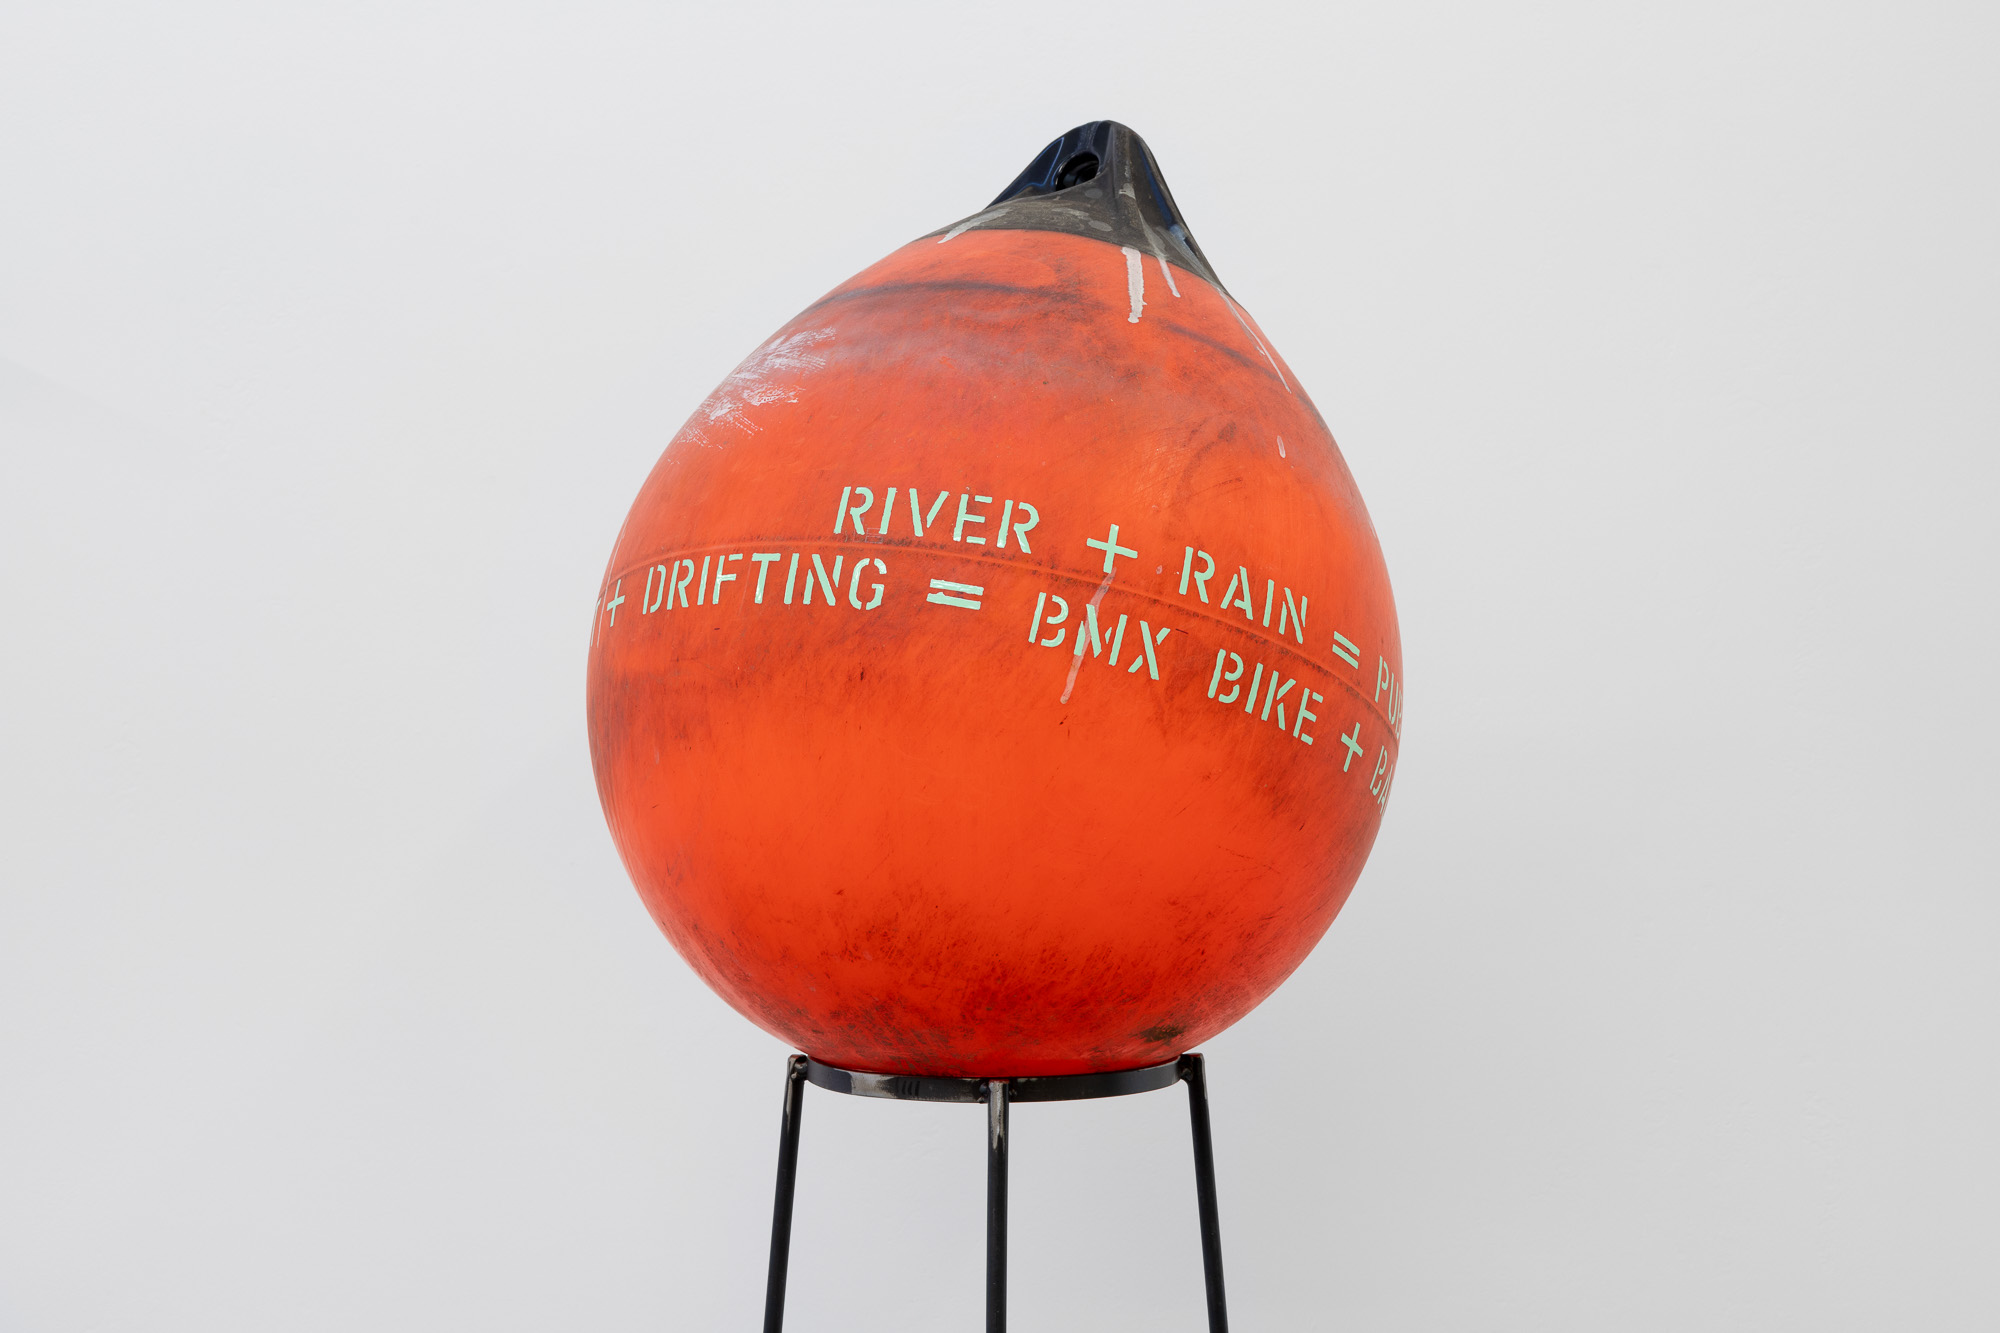 An orange buoy used at sea printed with the words 'RIVER + RAIN =' and on the second line '+ DRIFTING = BMX BIKE +'